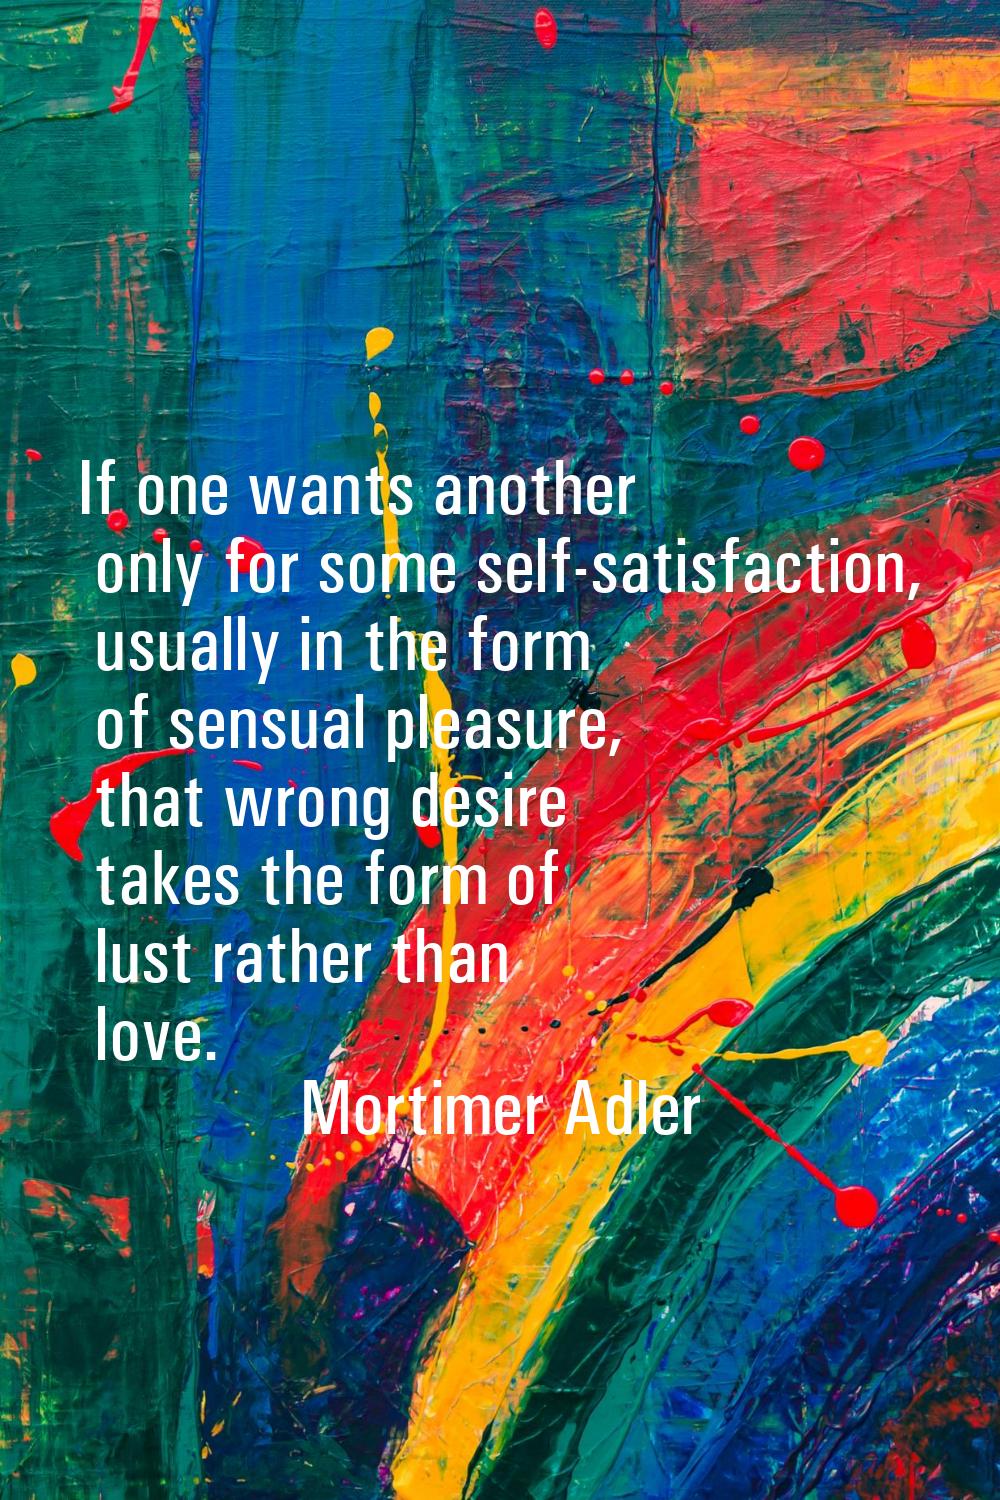 If one wants another only for some self-satisfaction, usually in the form of sensual pleasure, that